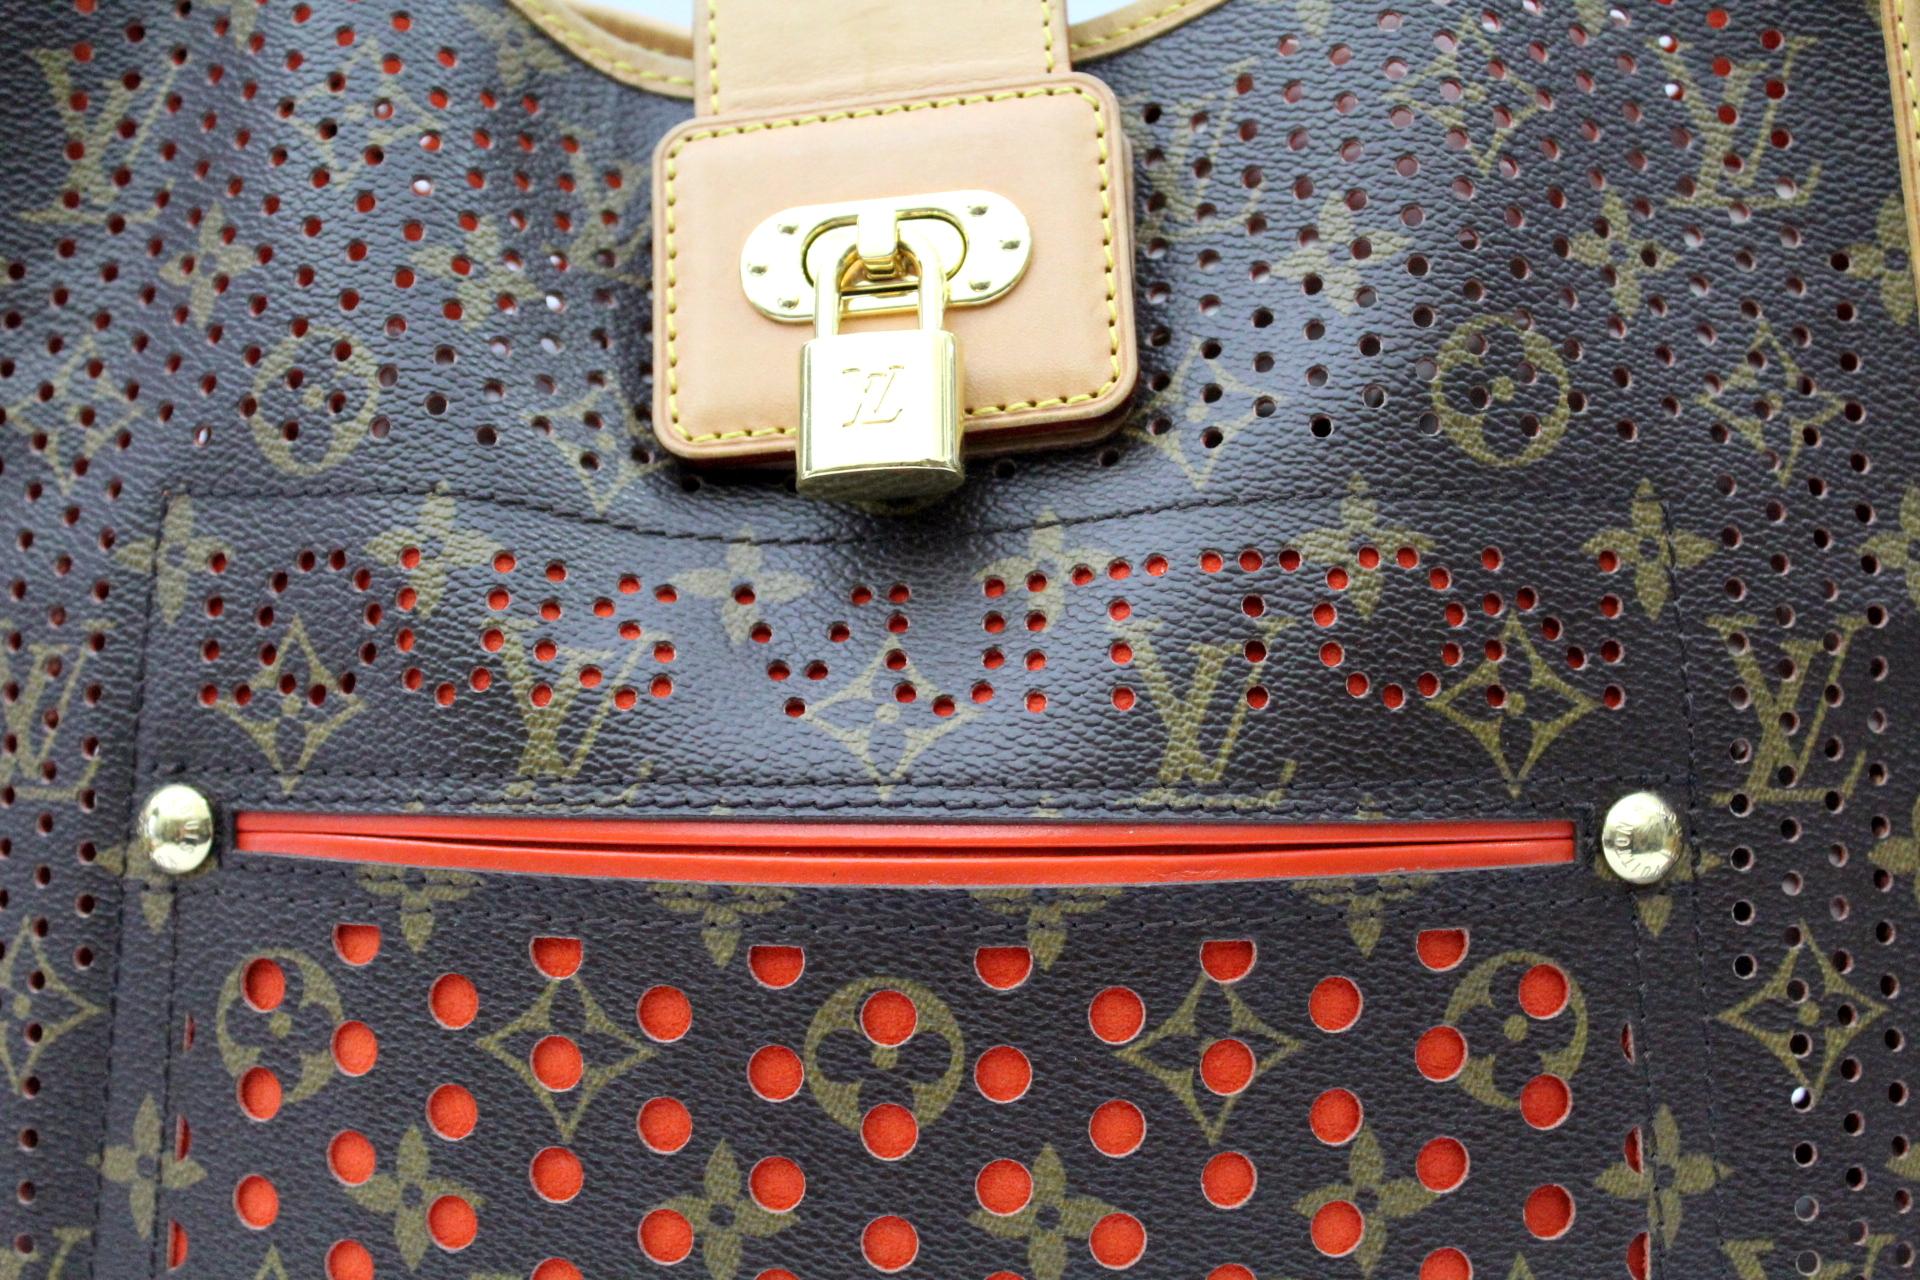 Don't miss out on your chance to own this spectacular and limited edition Louis Vuitton Orange Monogram Perforated Musette Bag. A definite fave for LV collectors everywhere, this lovely creation has the iconic monogram canvas that is perforated and